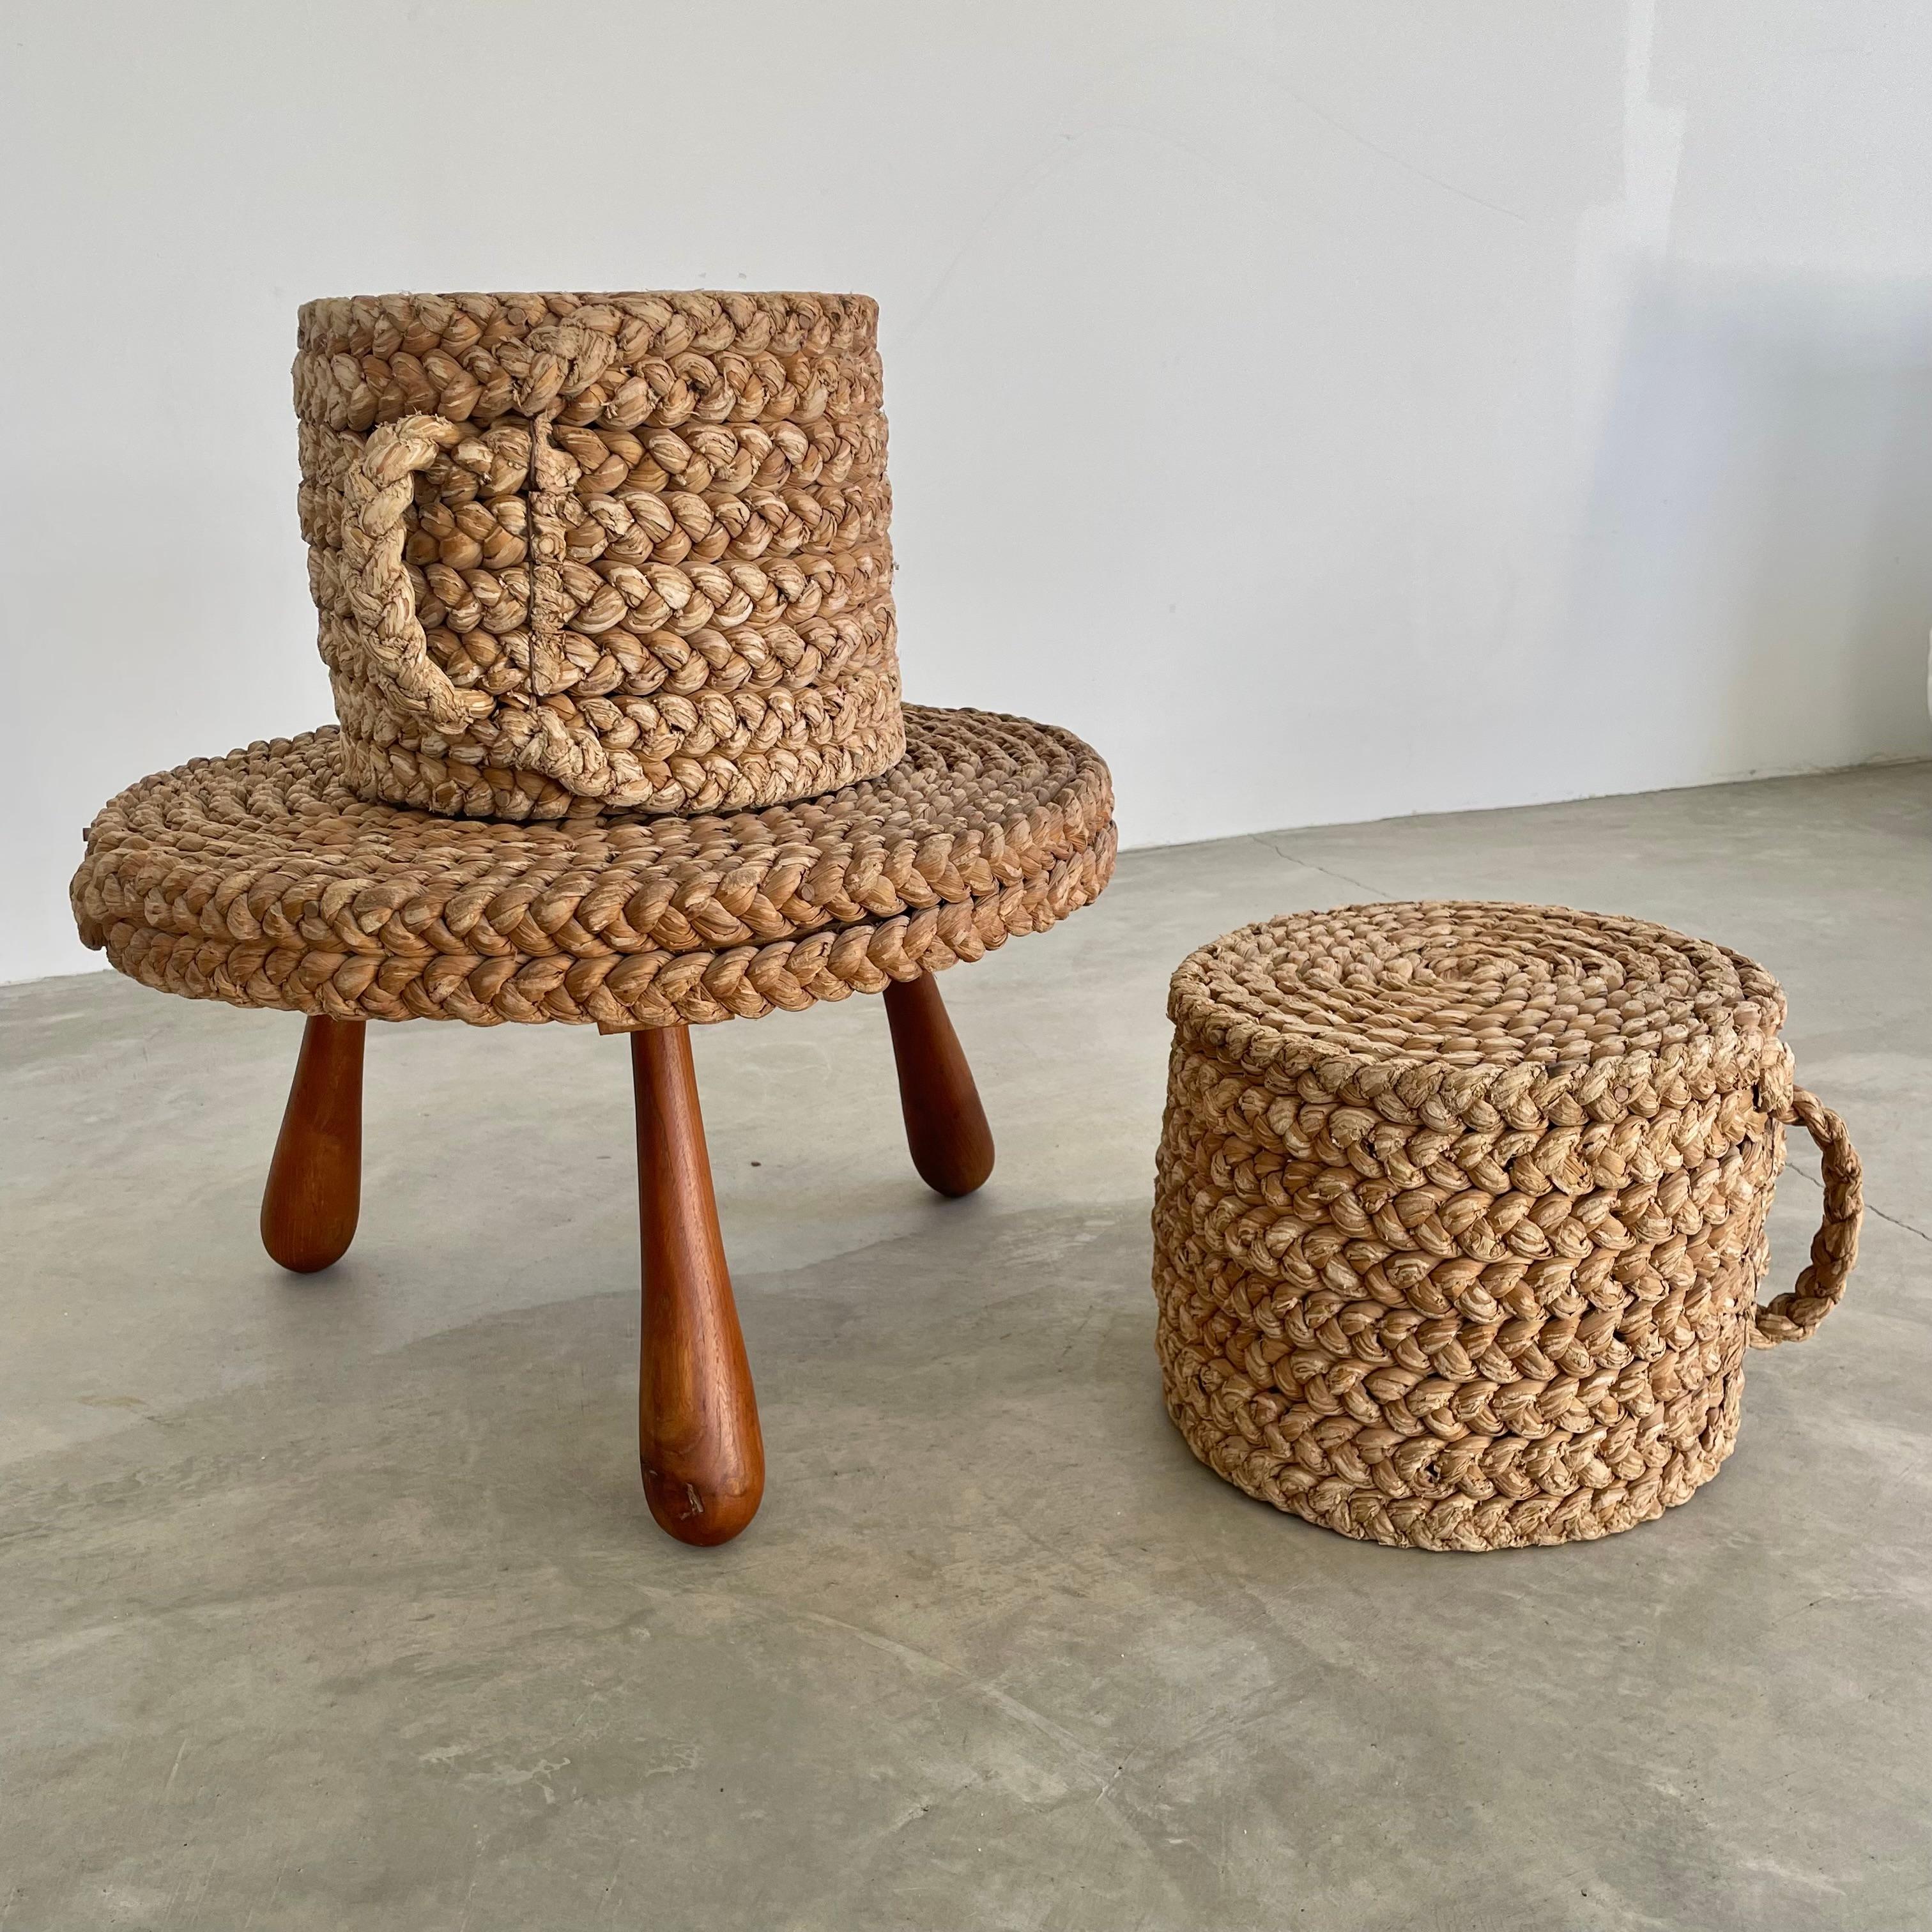 Rope and Wood Table with Two Nesting Stools, 1960s France For Sale 2